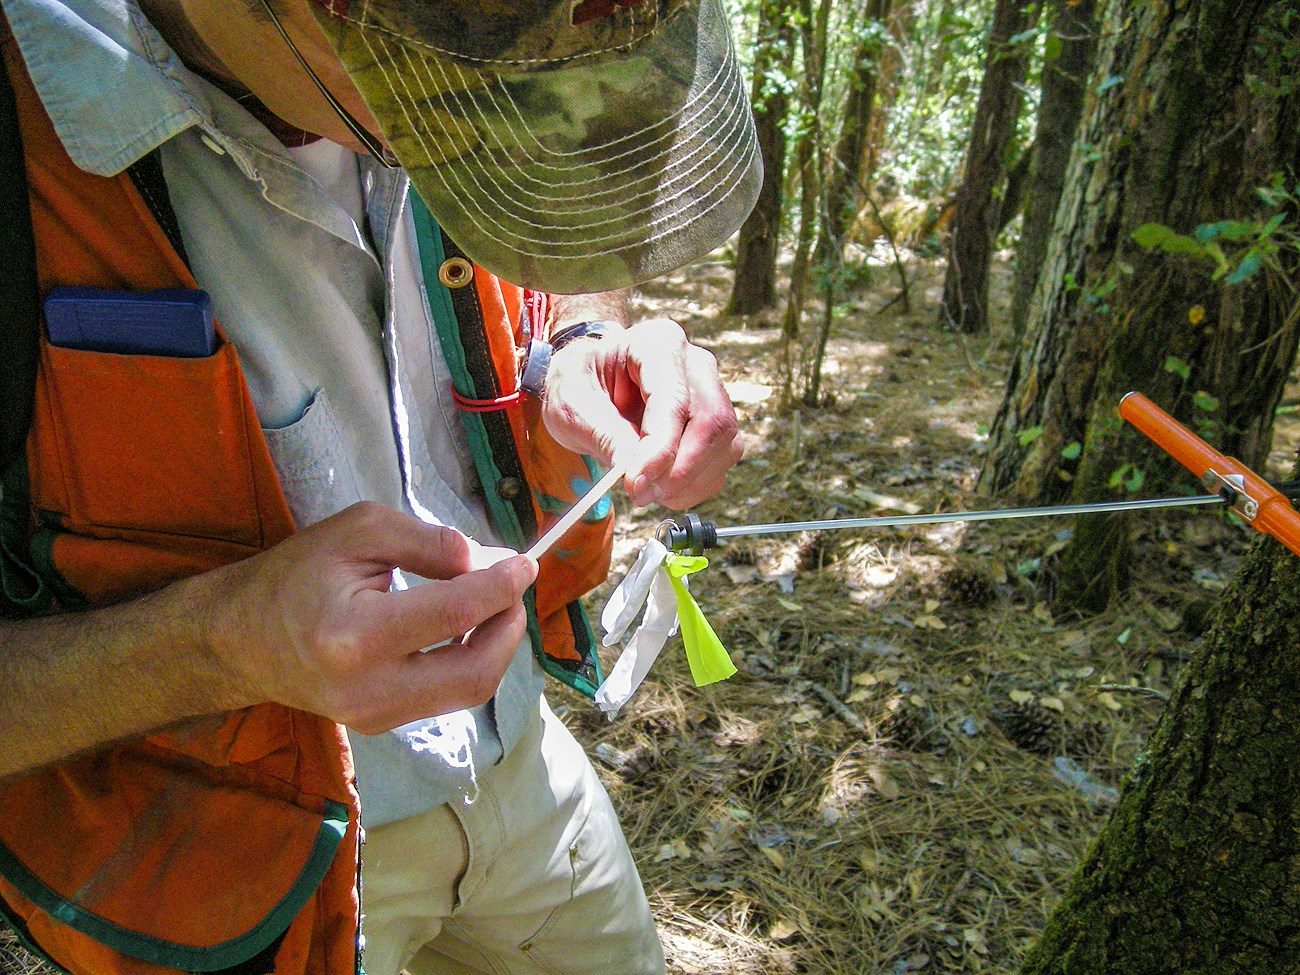 Person in a camouflage hat and orange vest looks down at a thin strip in his hands. Beside him, a metal coring device is wedged in the trunk of a tree.